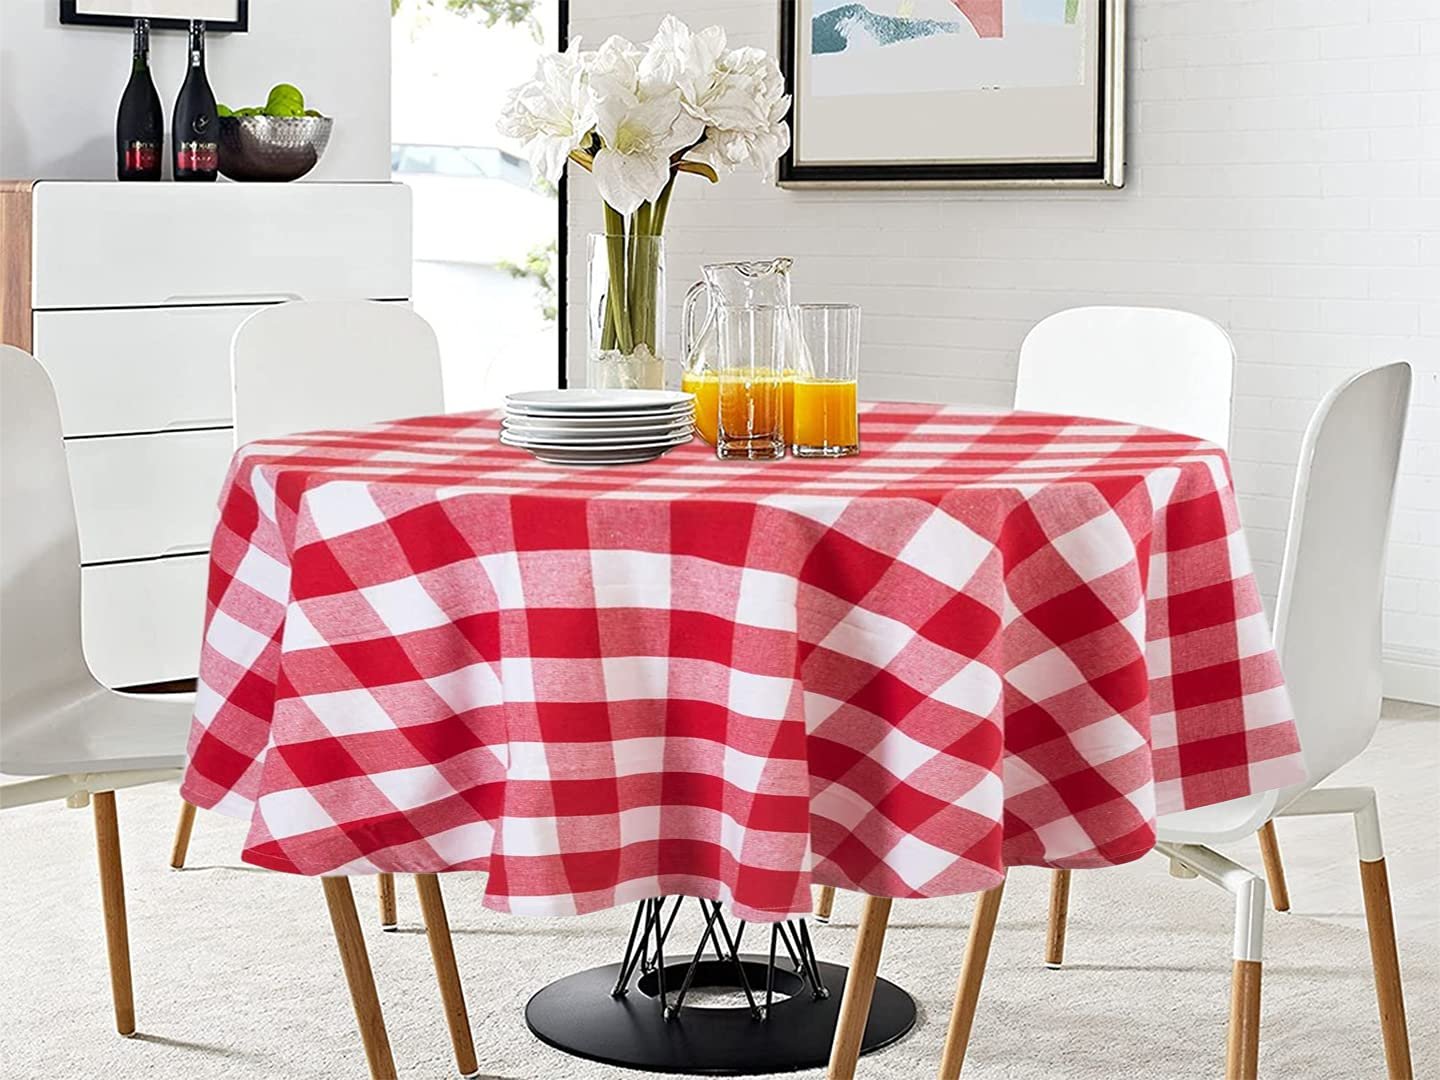 How to Calculate Table Cloth Size